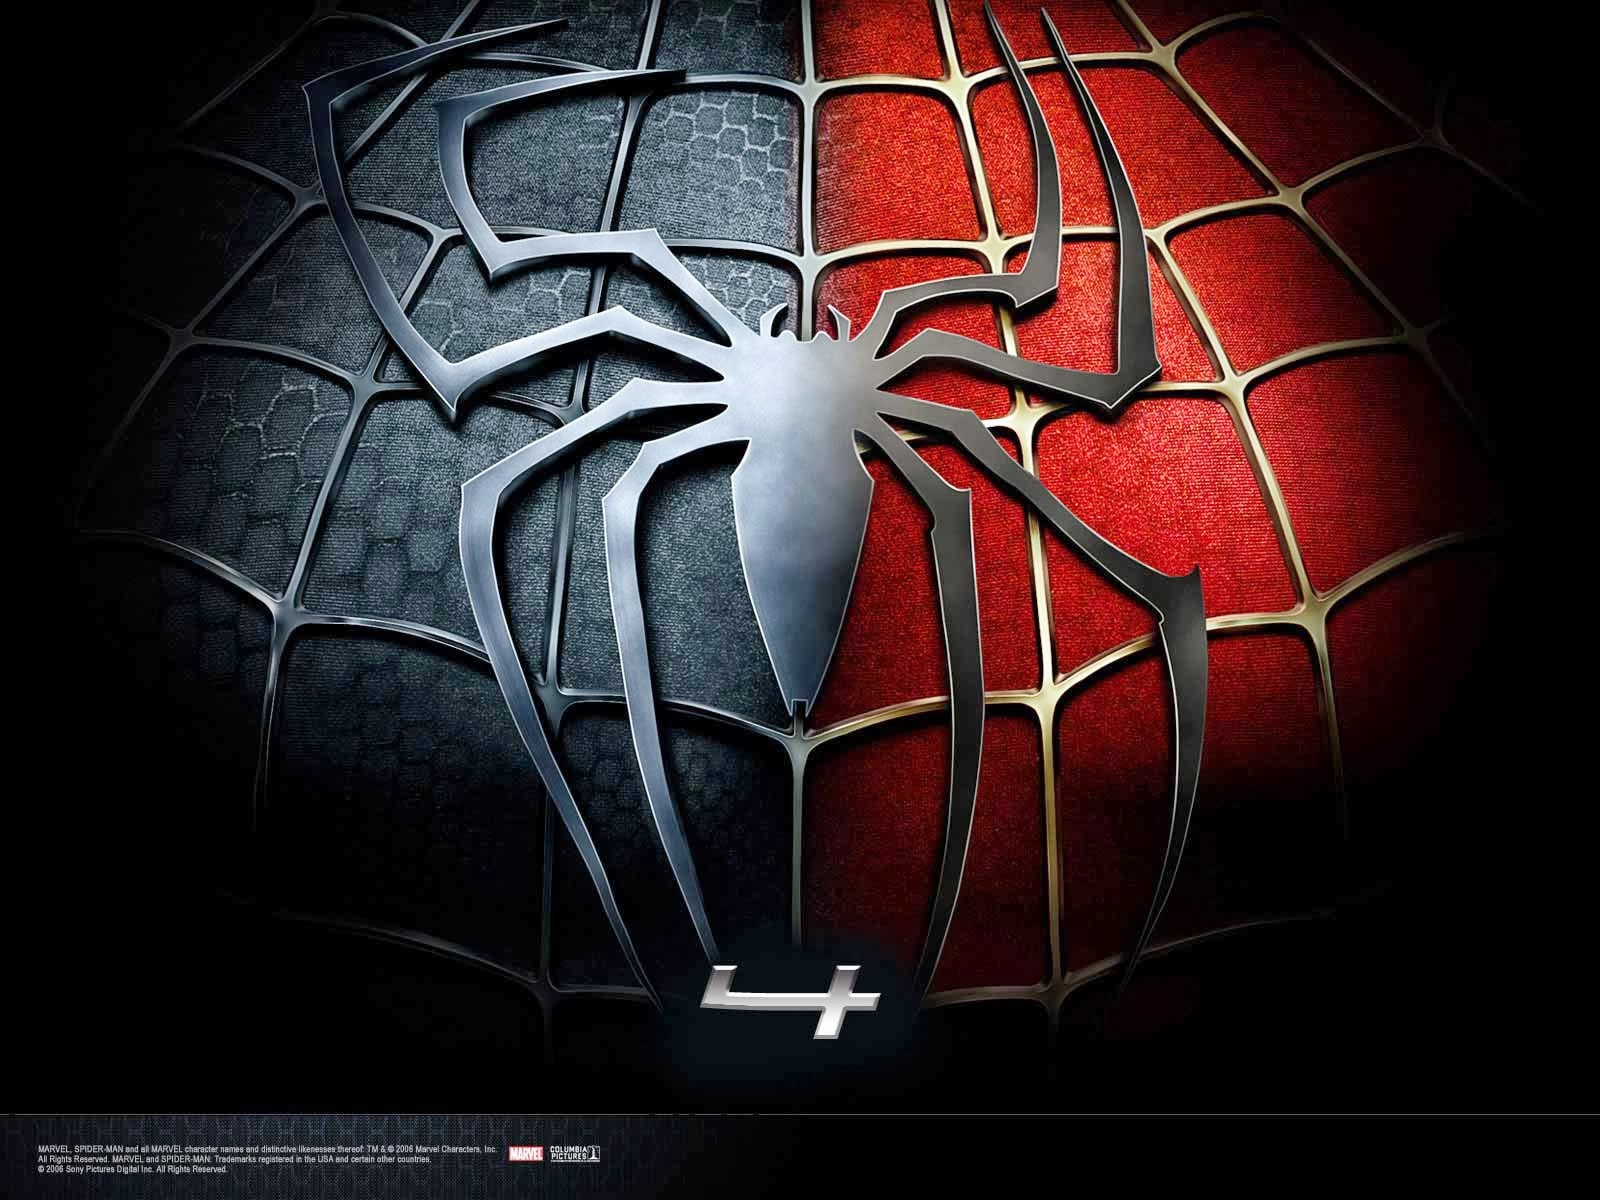 Spiderman 4 HD Wallpapers   HD Wallpapers Blog 1600x1200